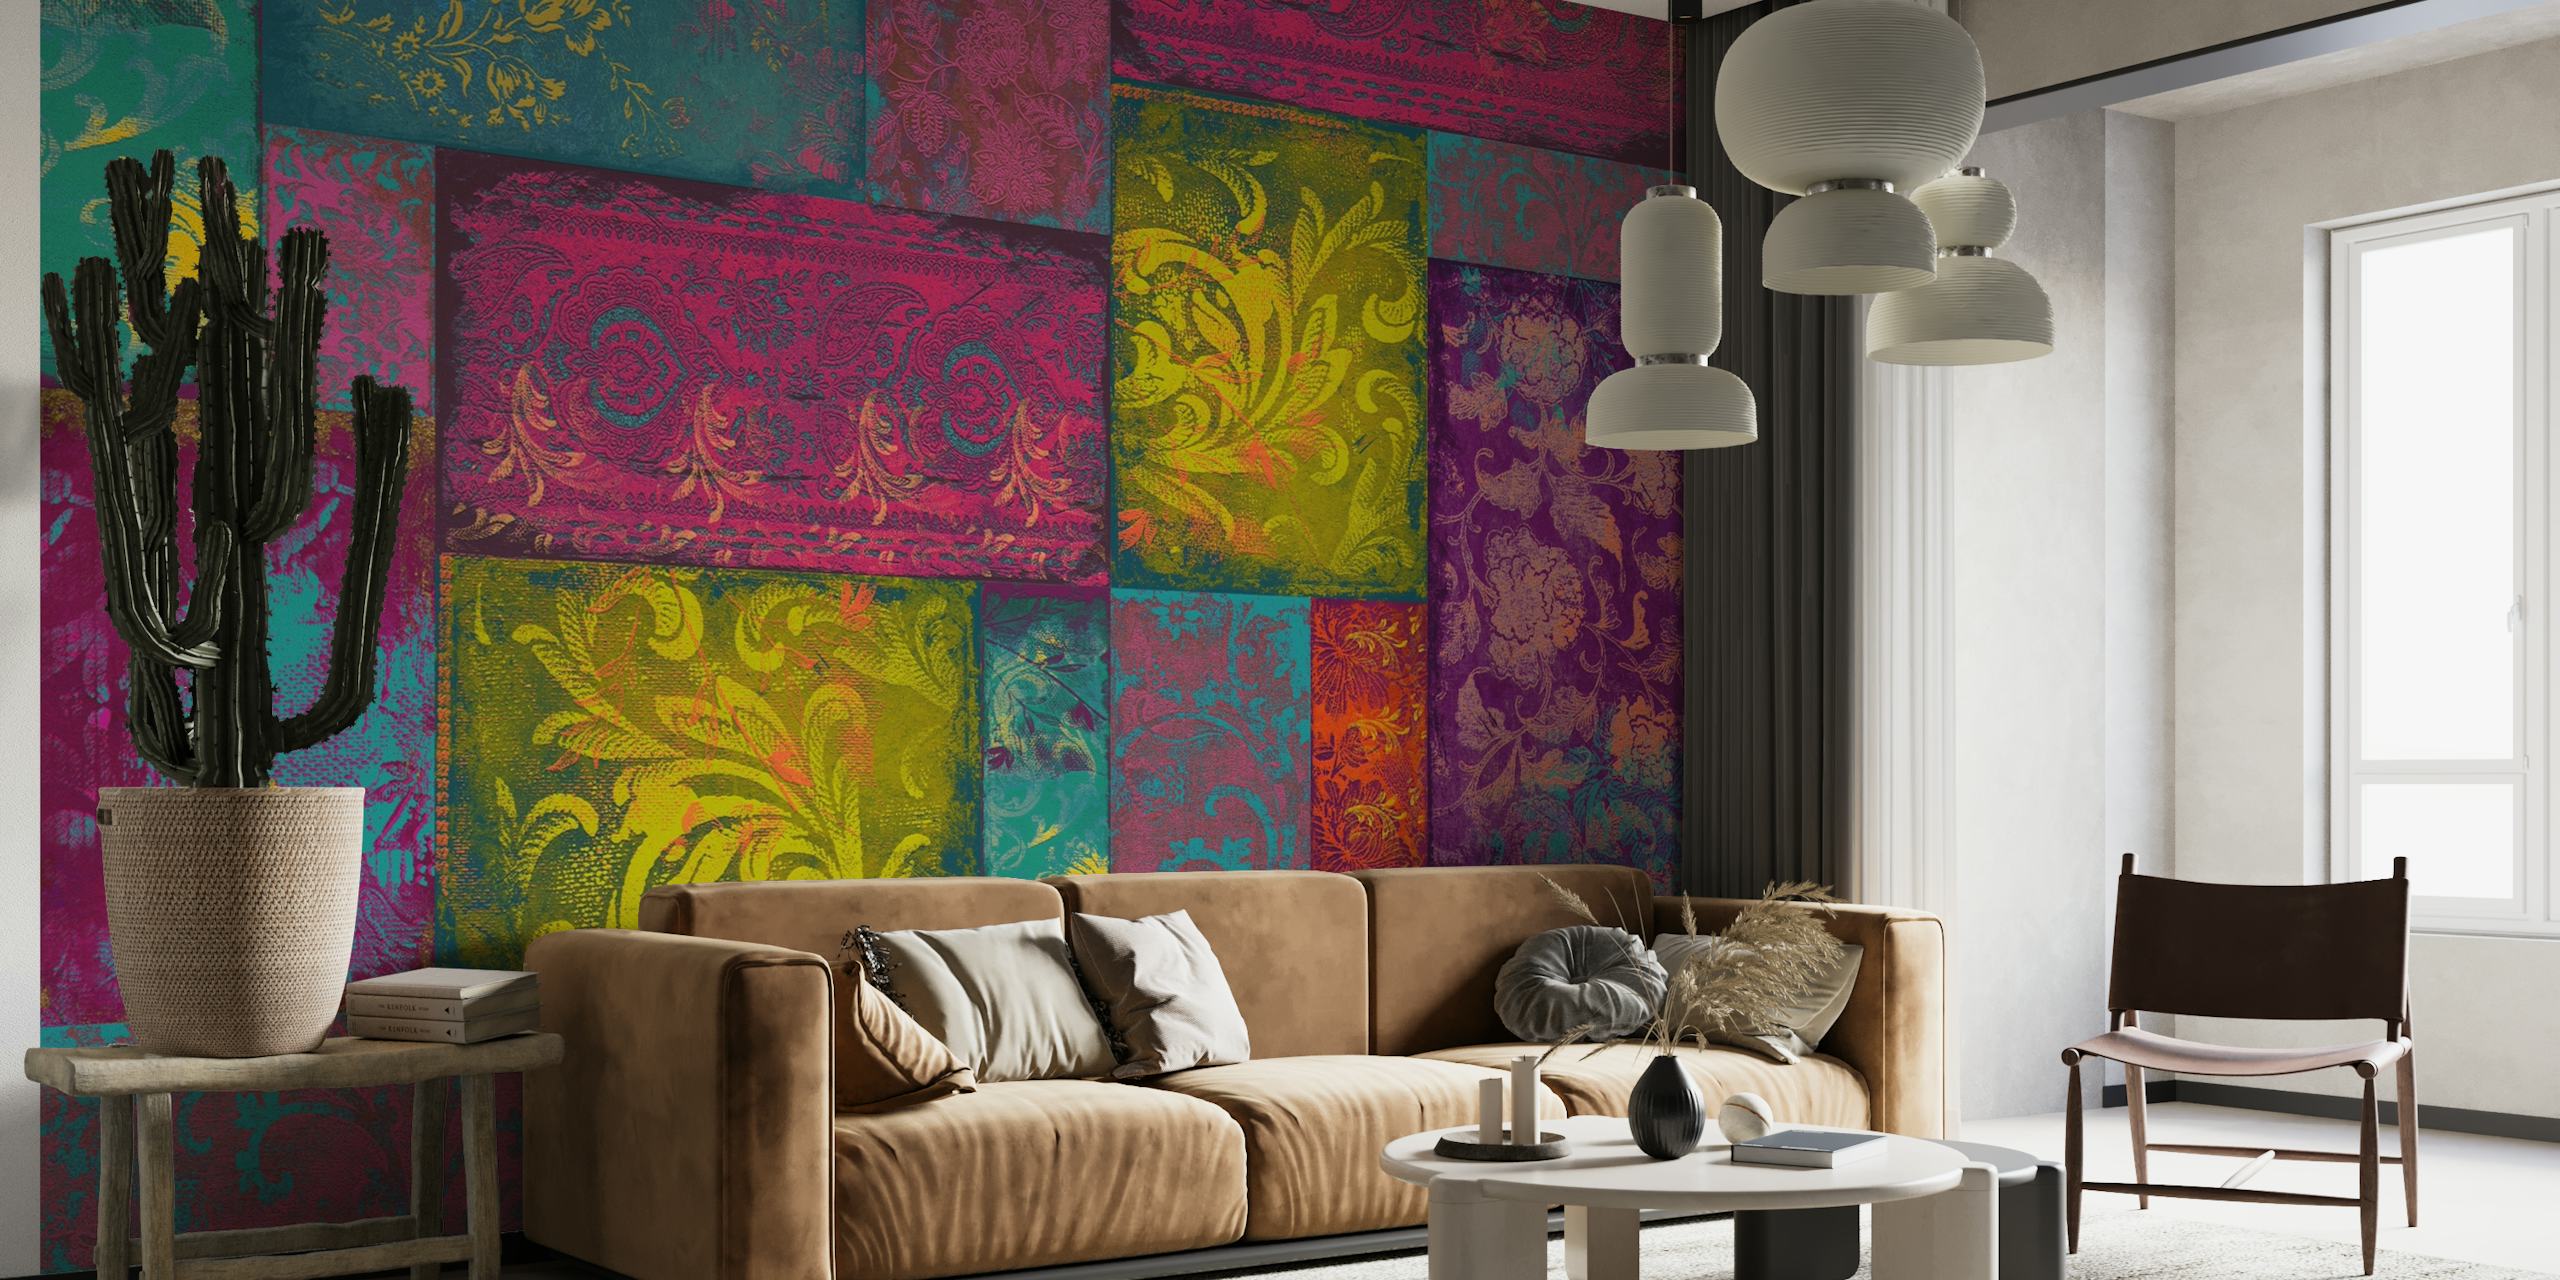 Bohemian Patchwork hot pink wall mural featuring a variety of patterns in shades of pink, yellow, and purple